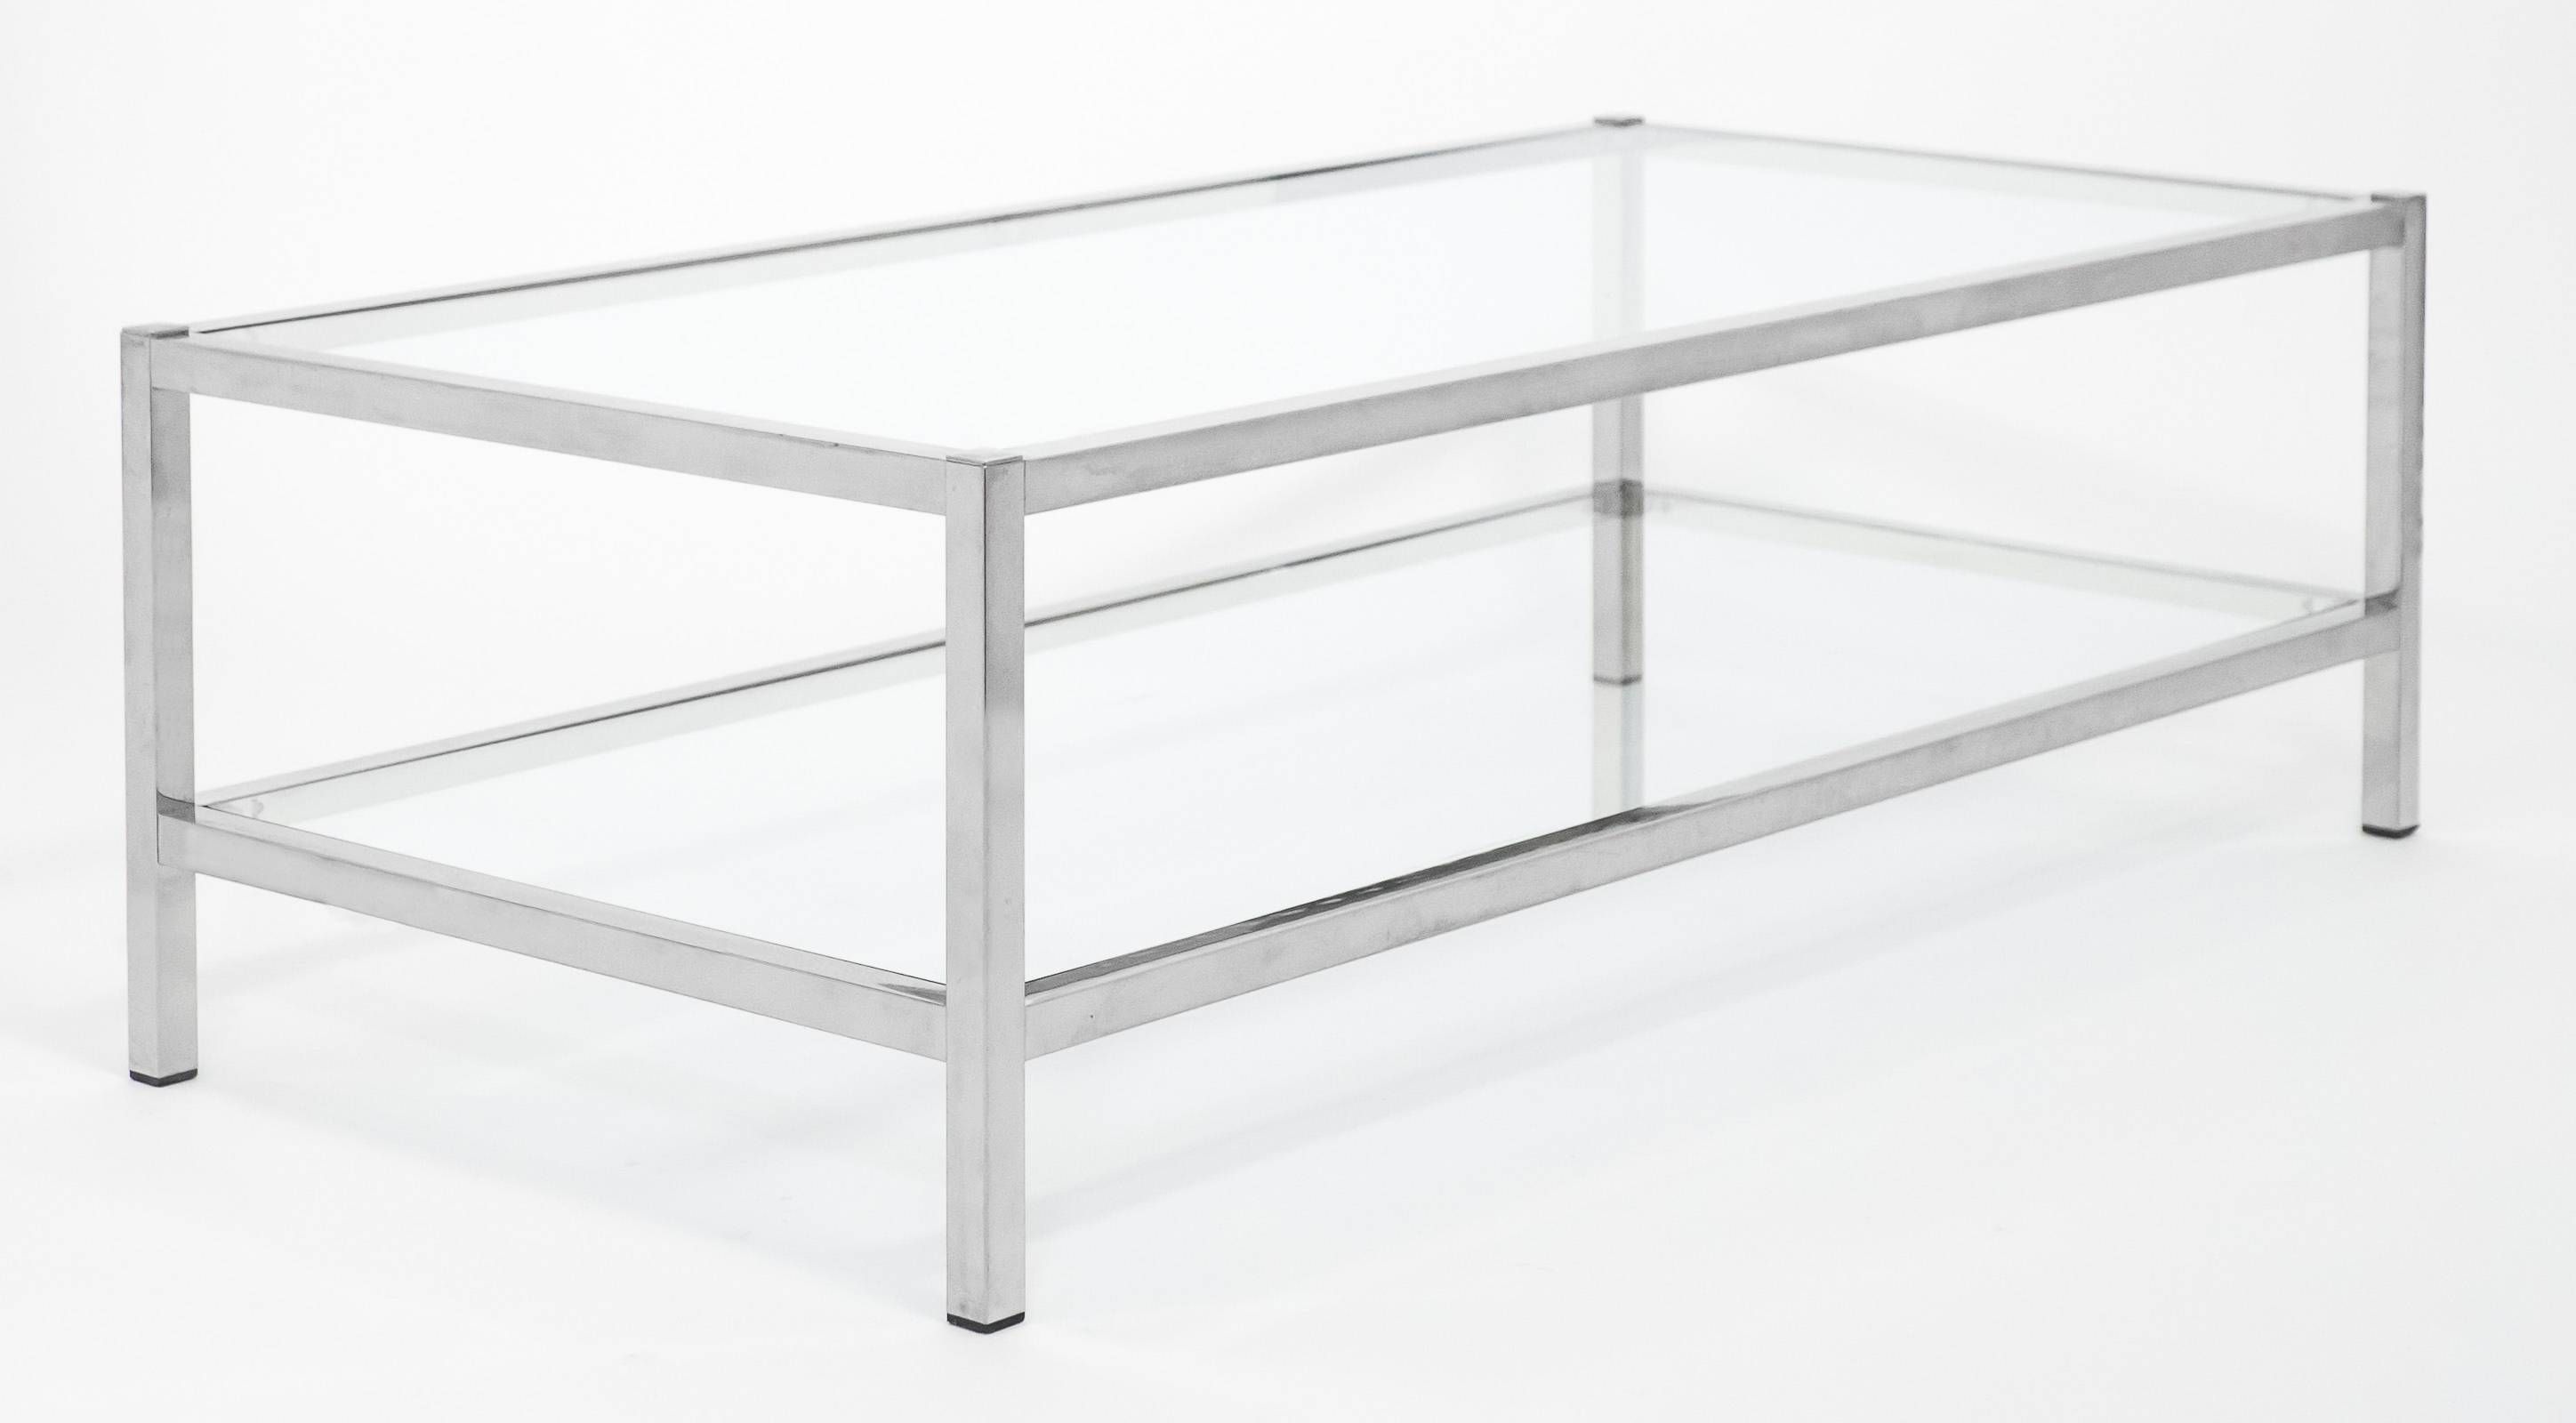 French Vintage Chrome And Glass Coffee Table – Jean Marc Fray With Regard To Chrome And Glass Coffee Tables (View 18 of 30)